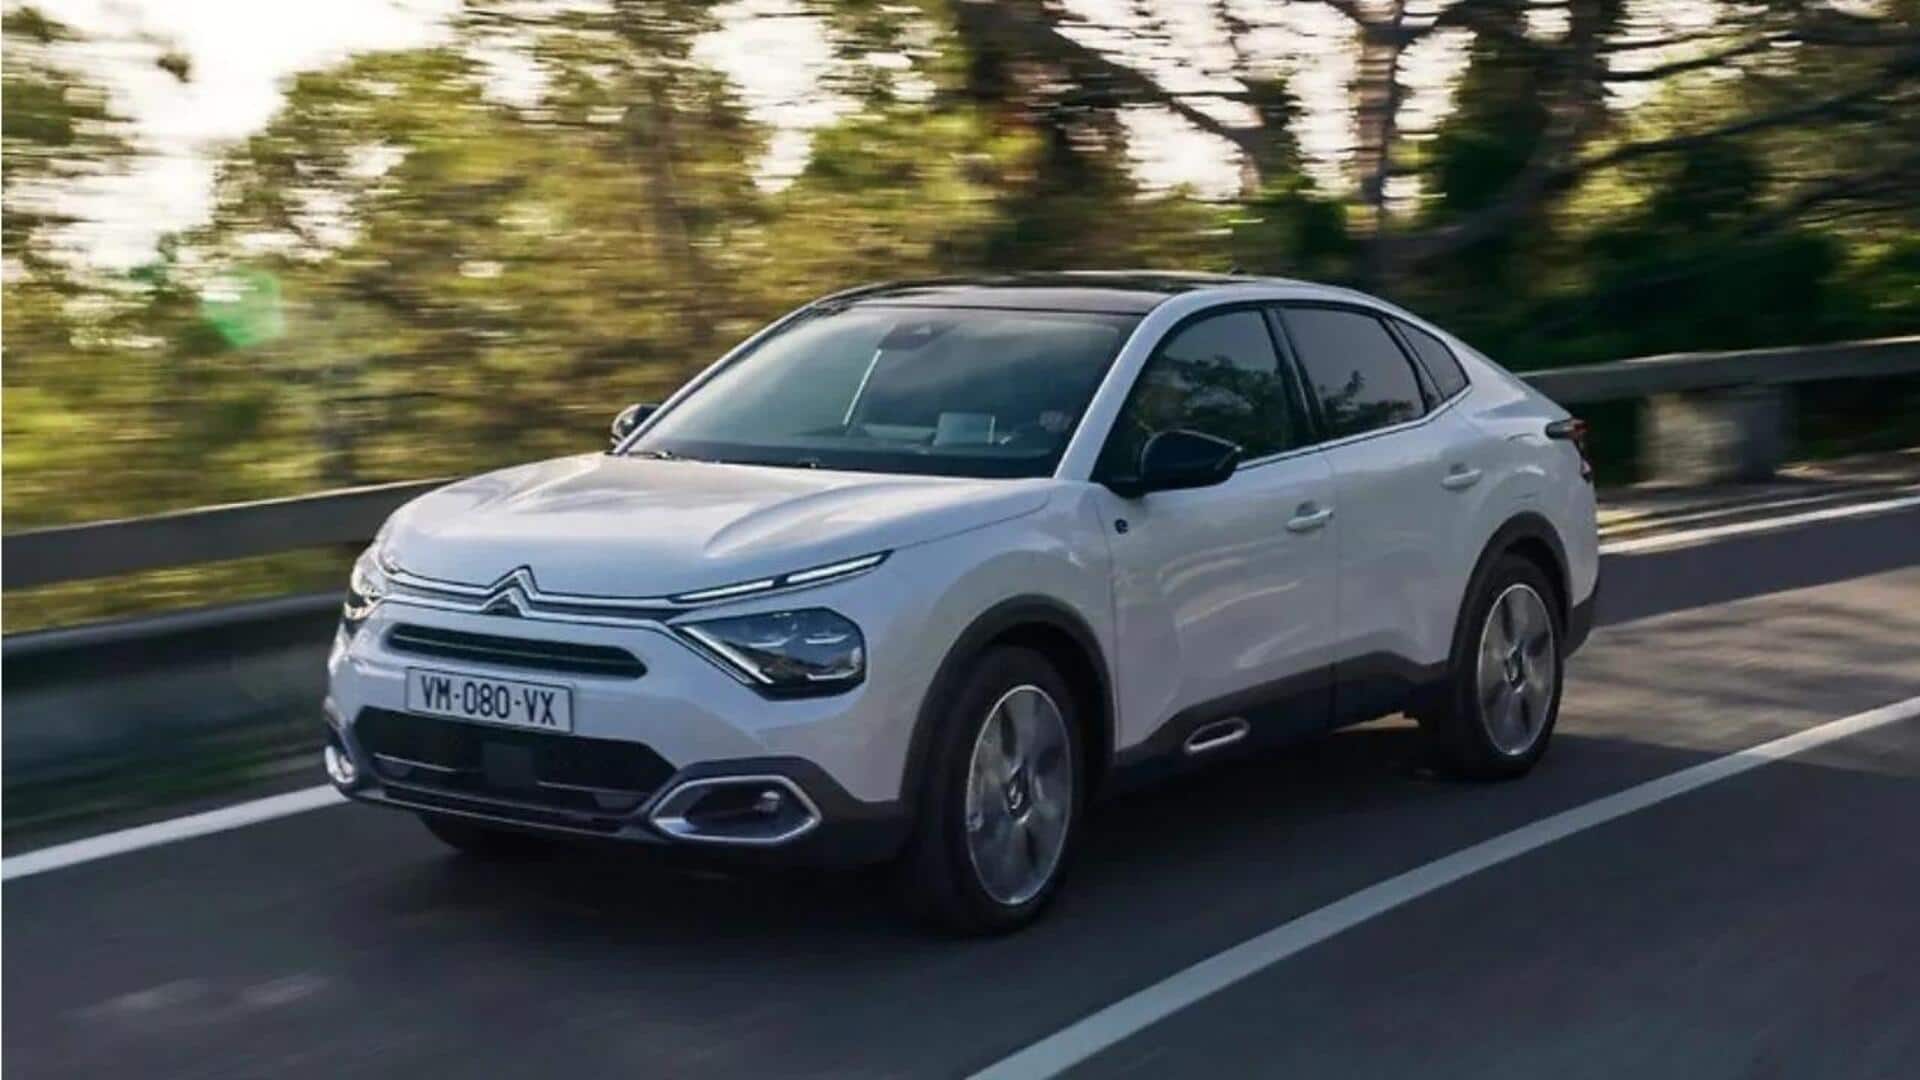 Citroen C3X crossover sedan to debut soon: What to expect